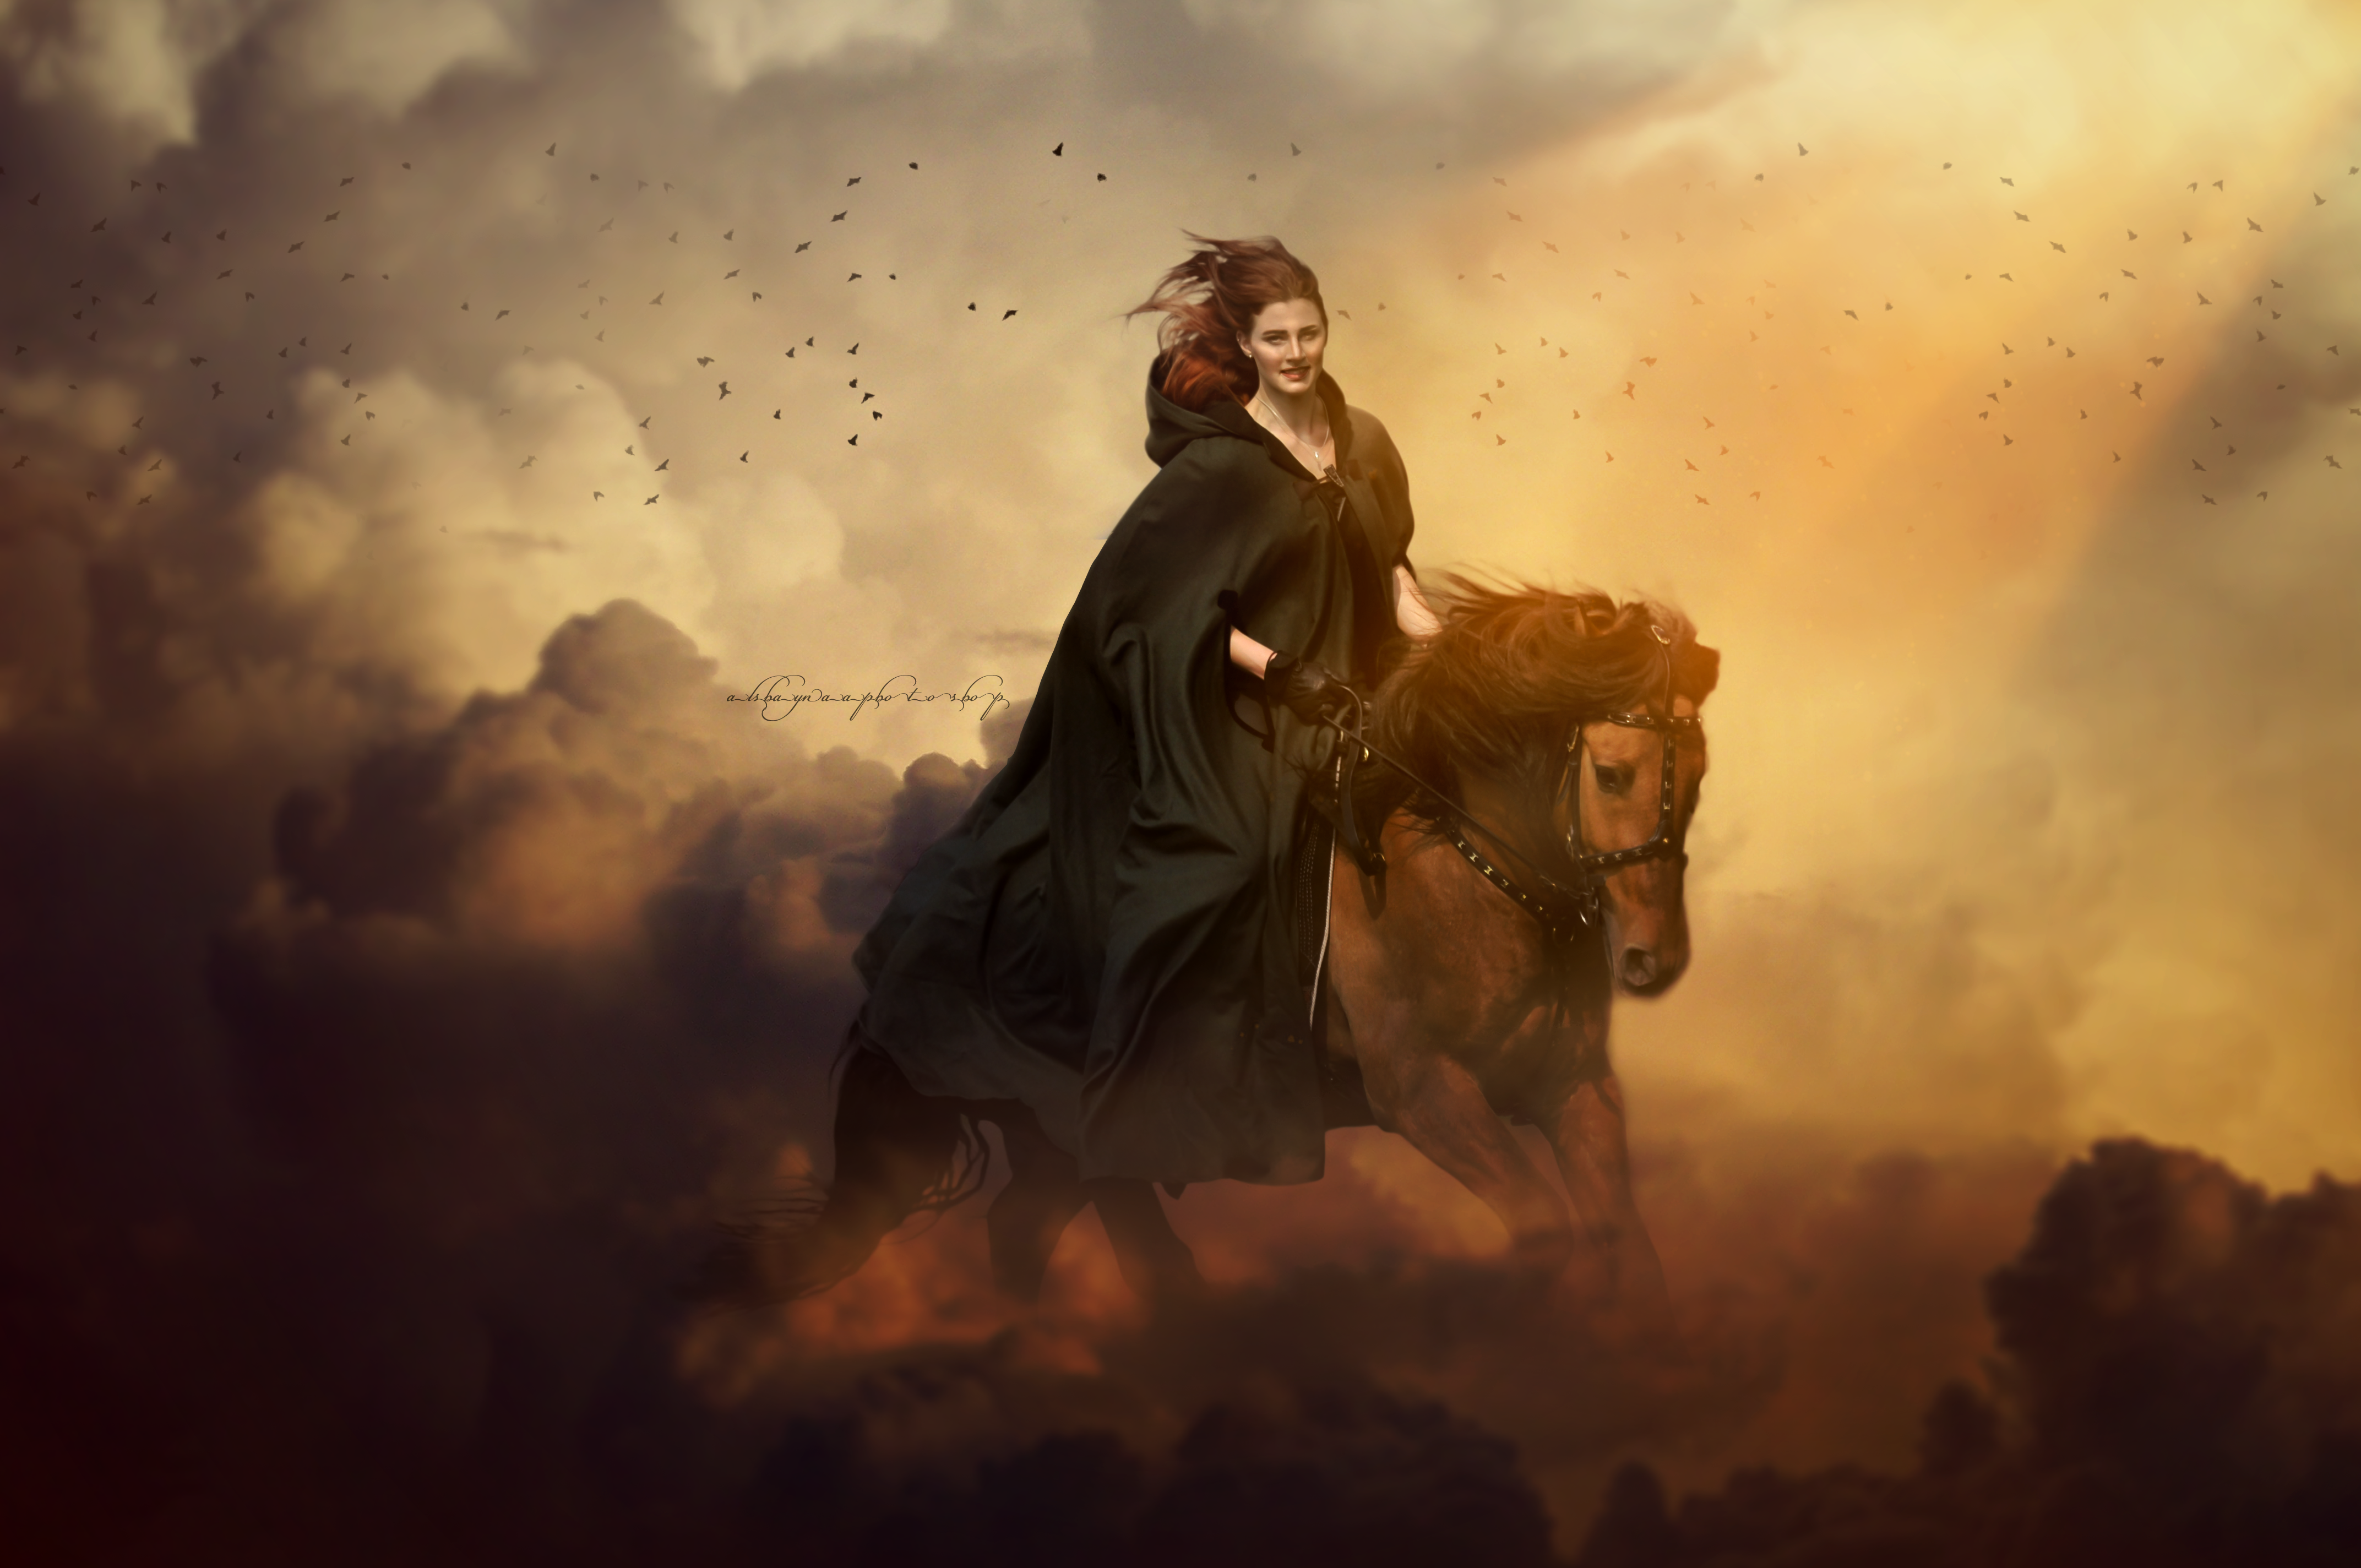 Photo Manipulation | Riding Horse In The Cloud